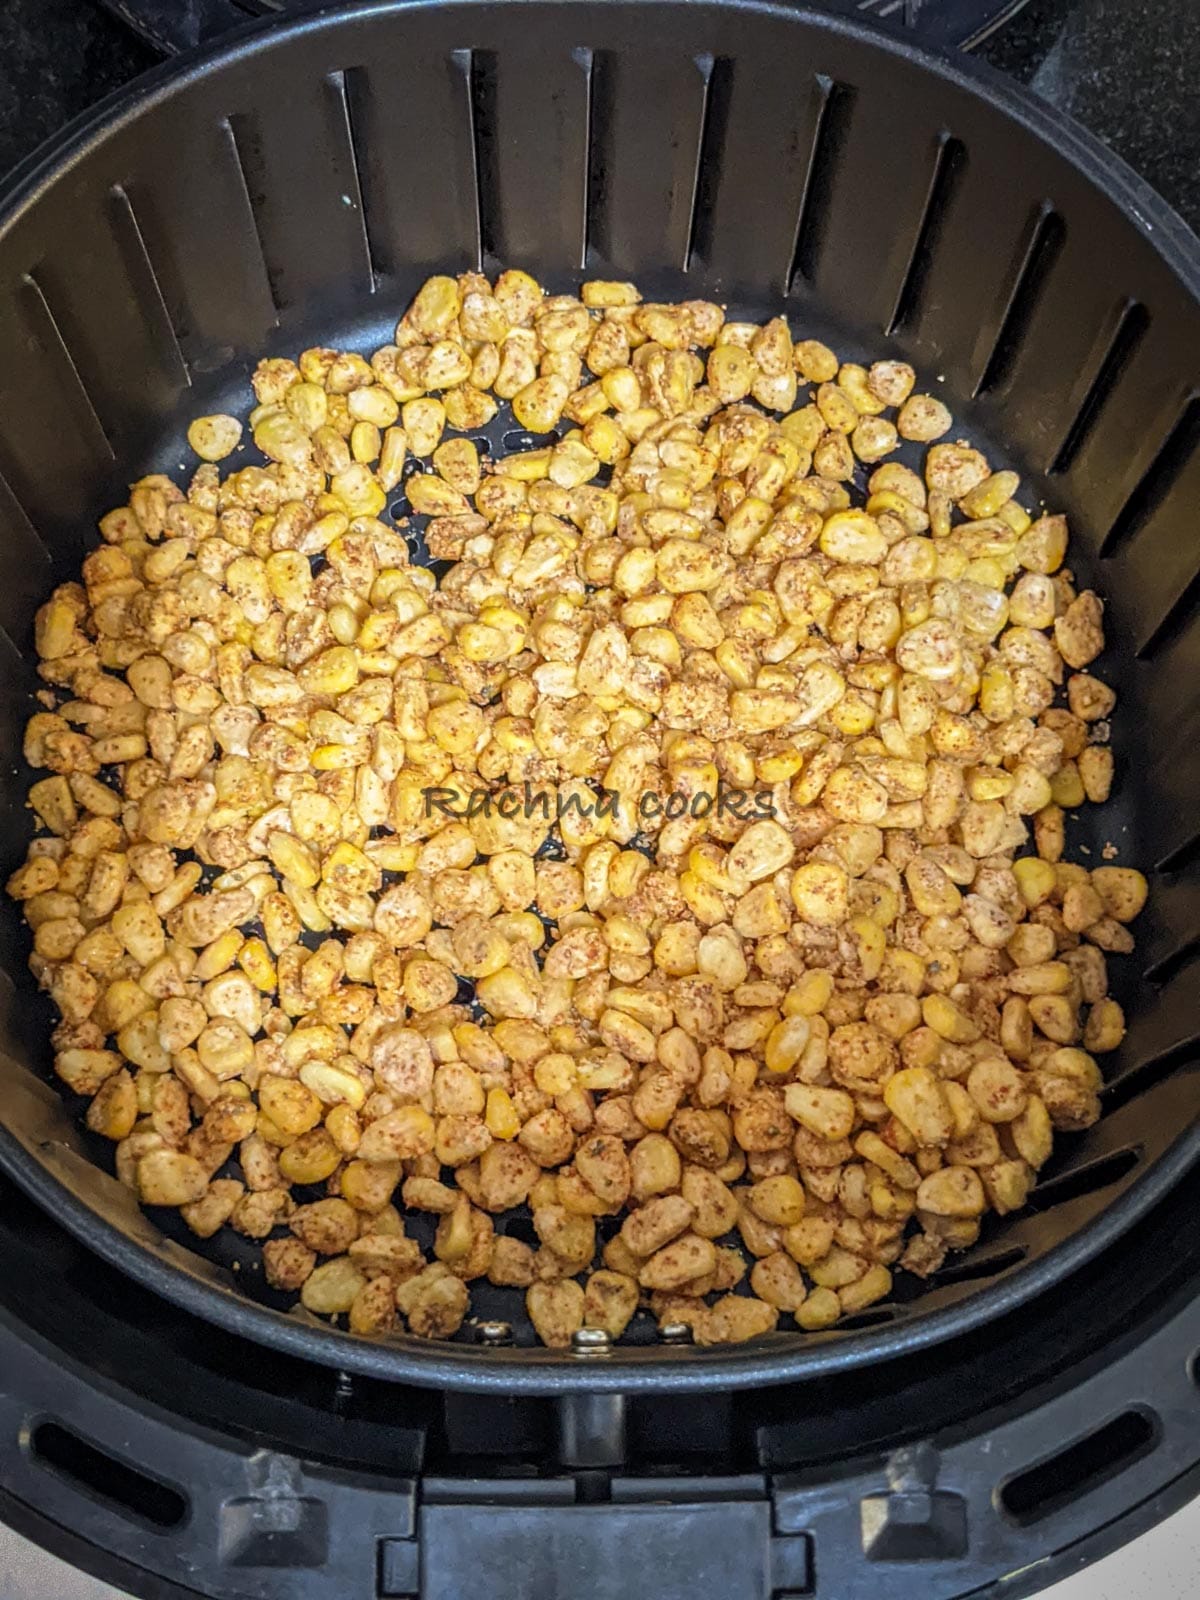 Coated corn placed in air fryer basket ready for air frying.